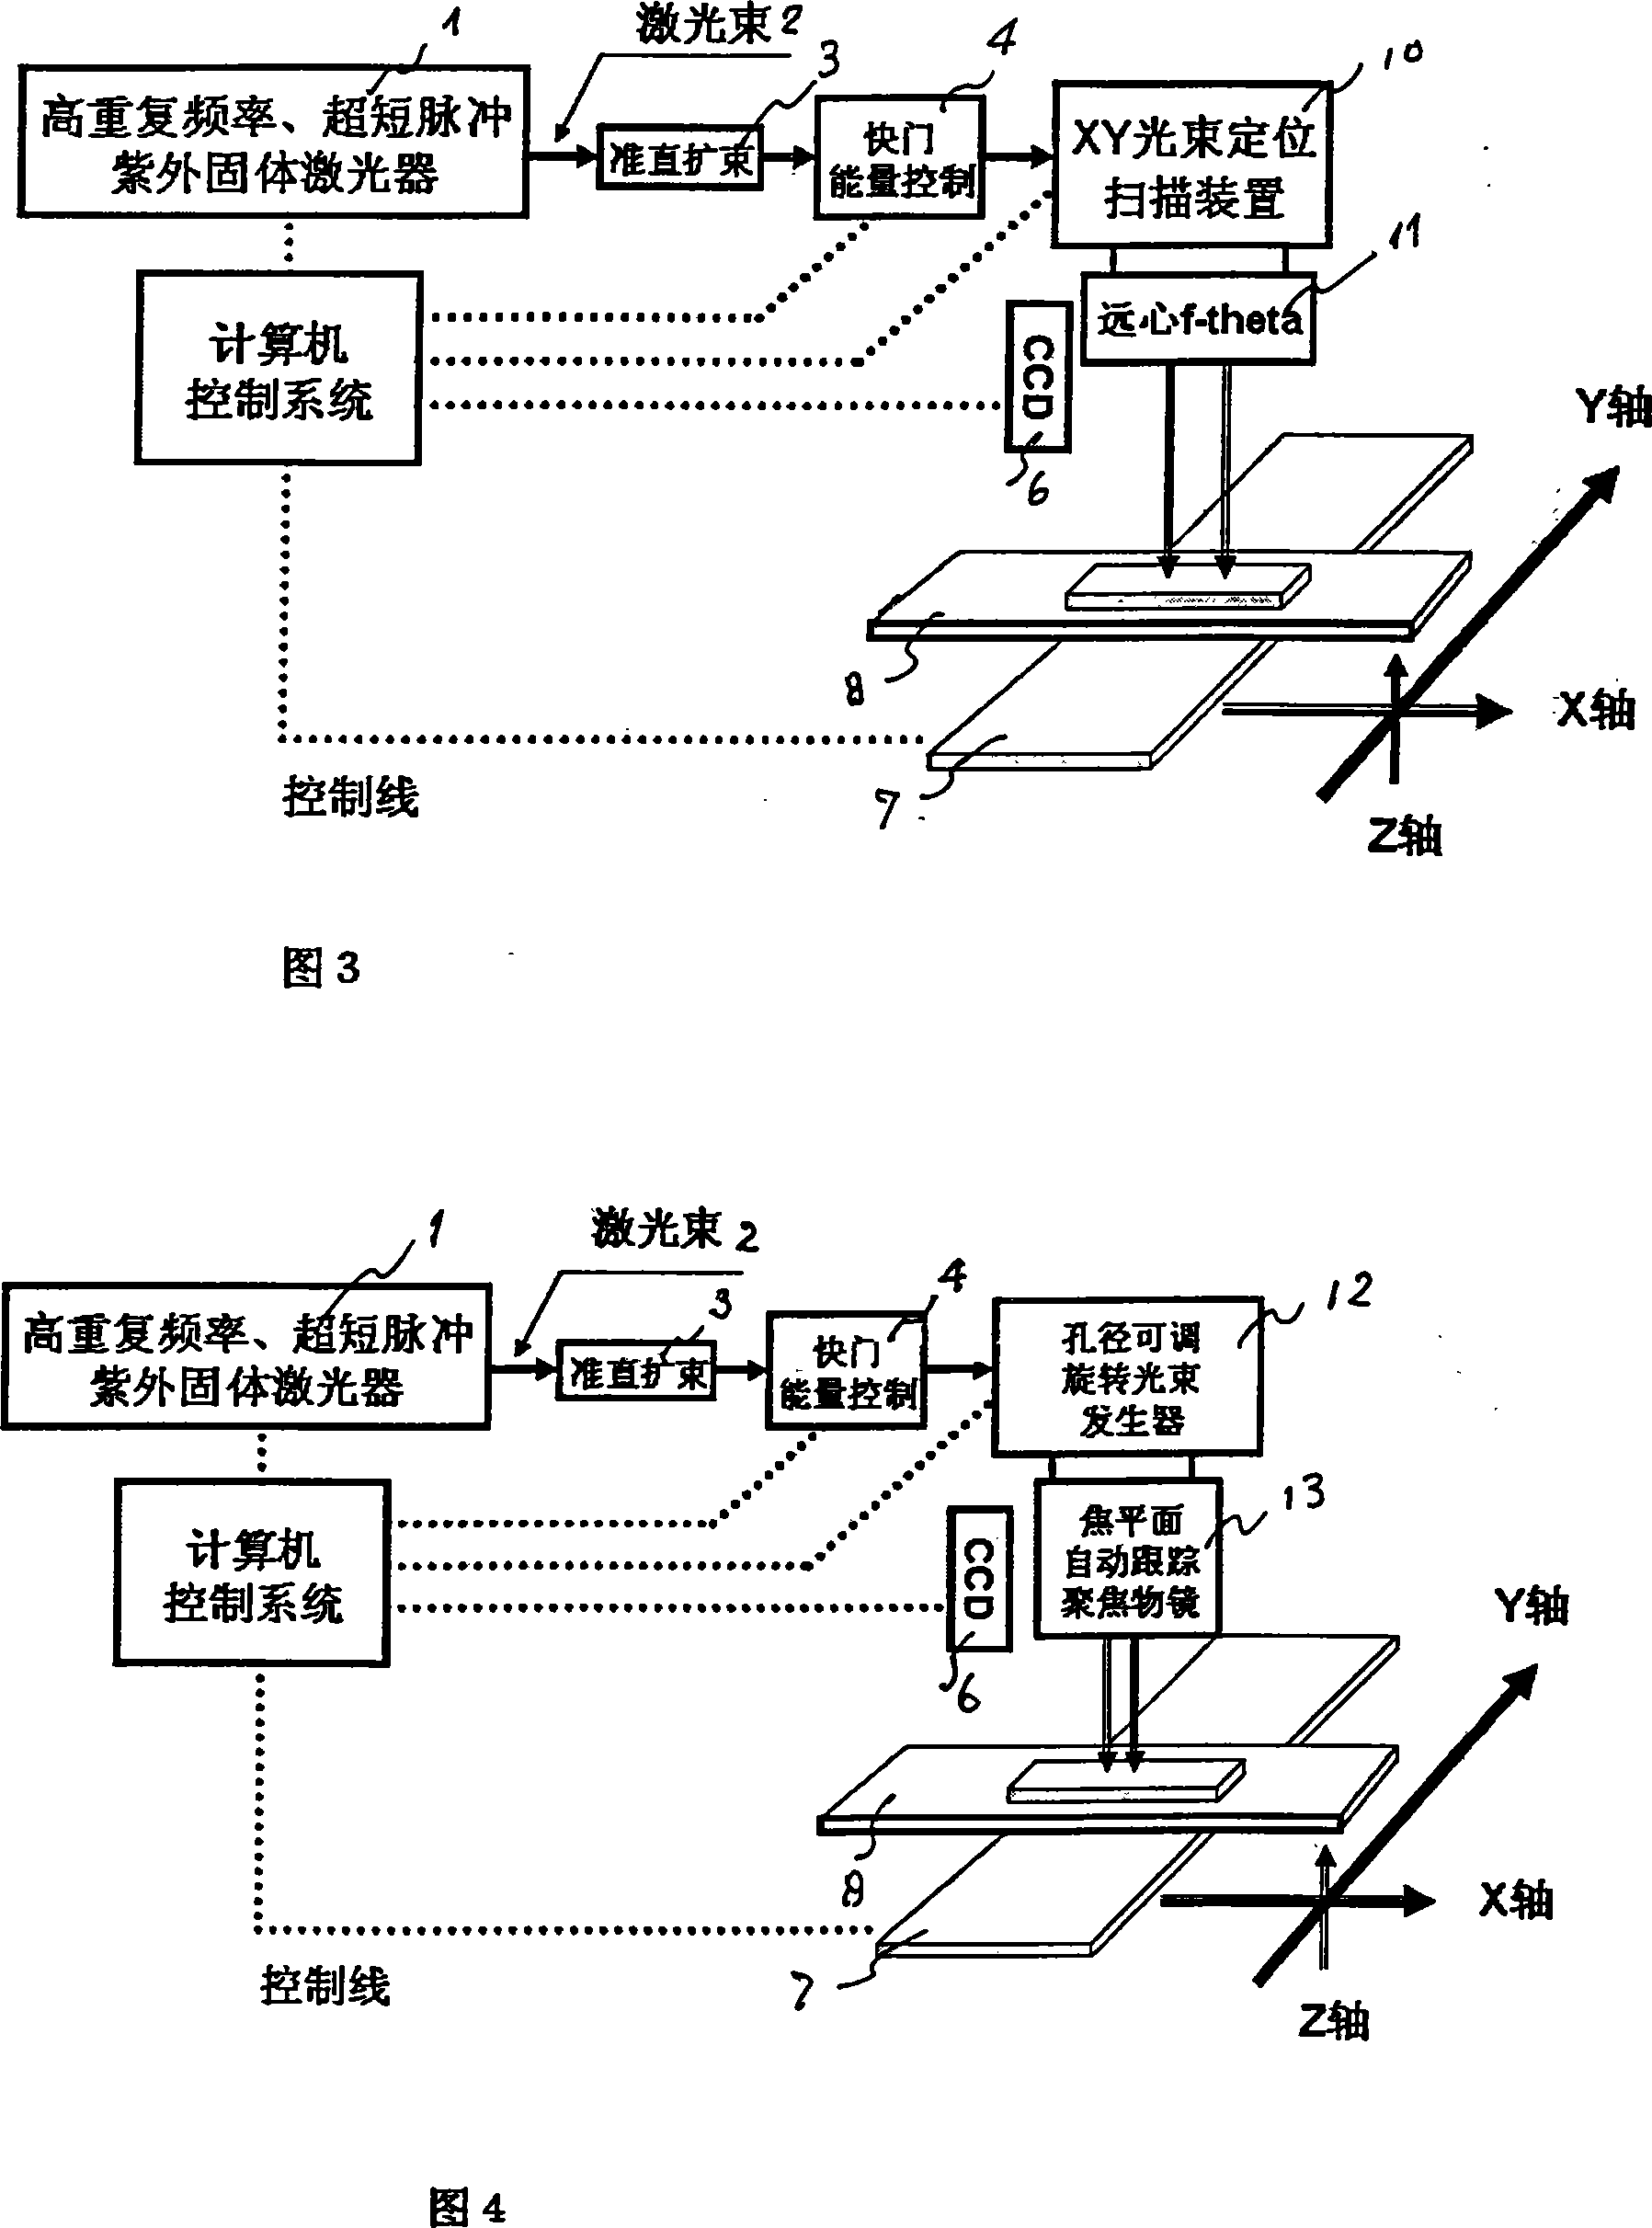 Laser array micro-pore forming device and method